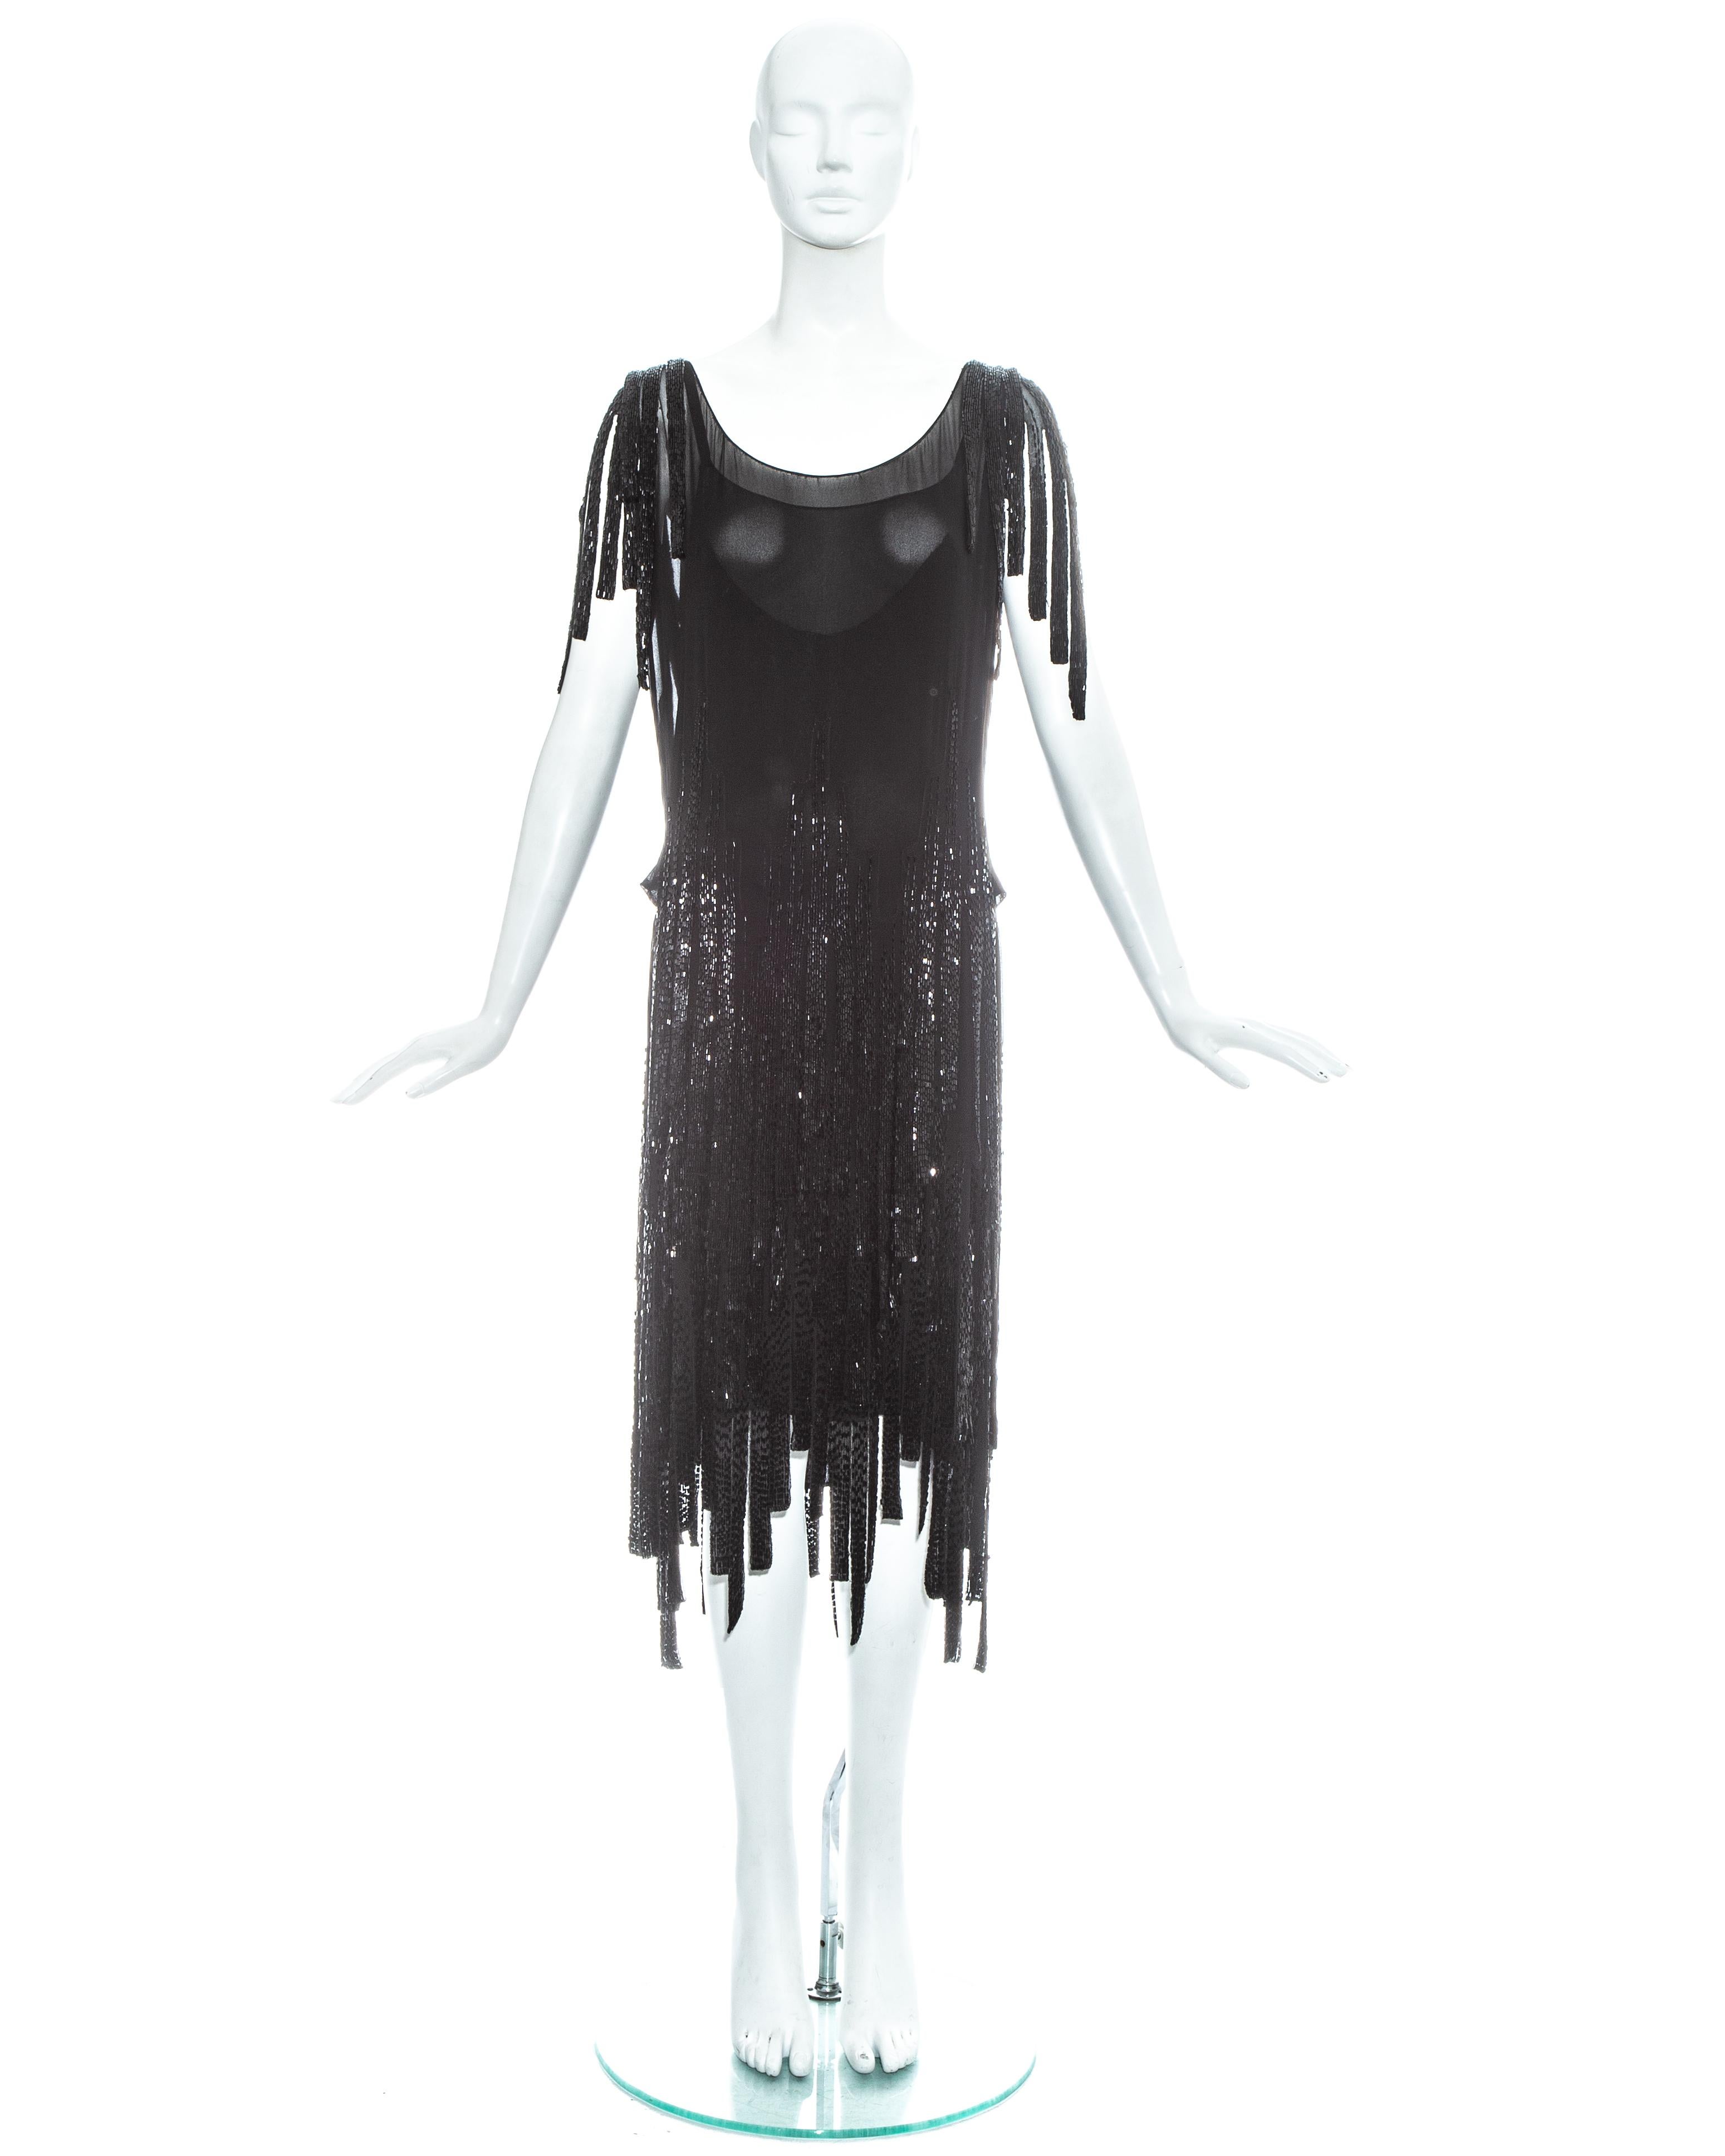 Gabrielle Chanel, Haute Couture beaded flapper dress 

- Glass beaded strands hang from the skirt and shoulders 
- One underdress and one overdress 
- Museum quality piece 

c. 1926

- Full condition report by request 